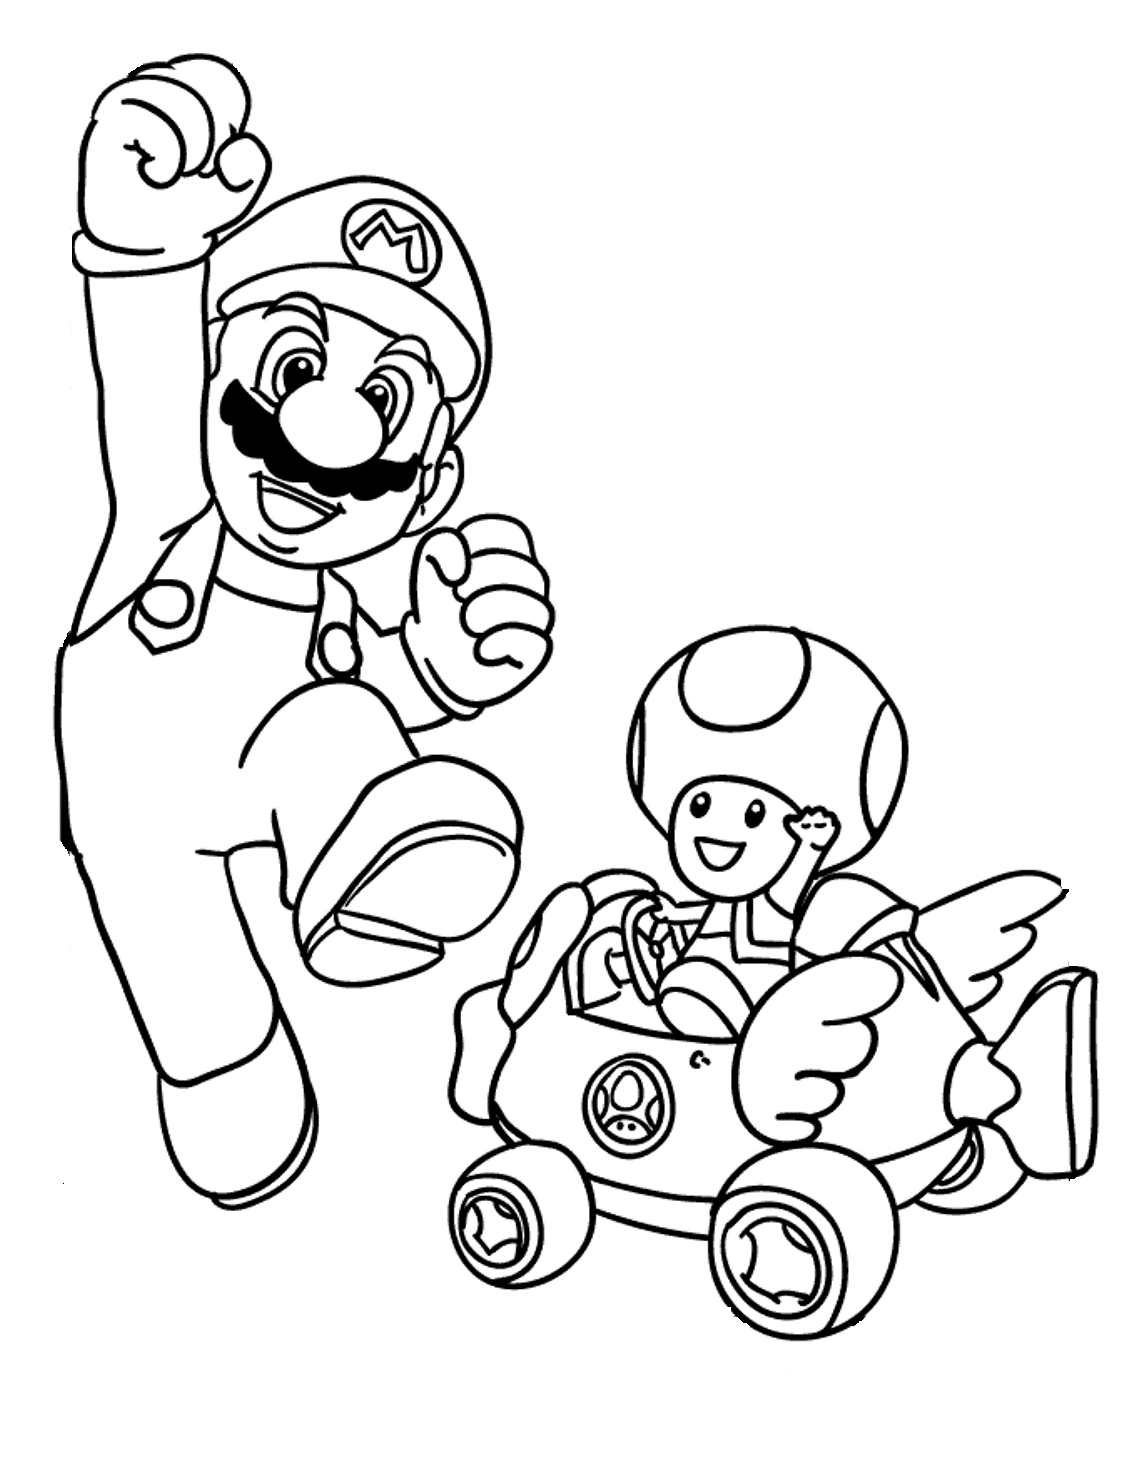 mario characters coloring pages all mario characters coloring pages coloring home coloring mario pages characters 